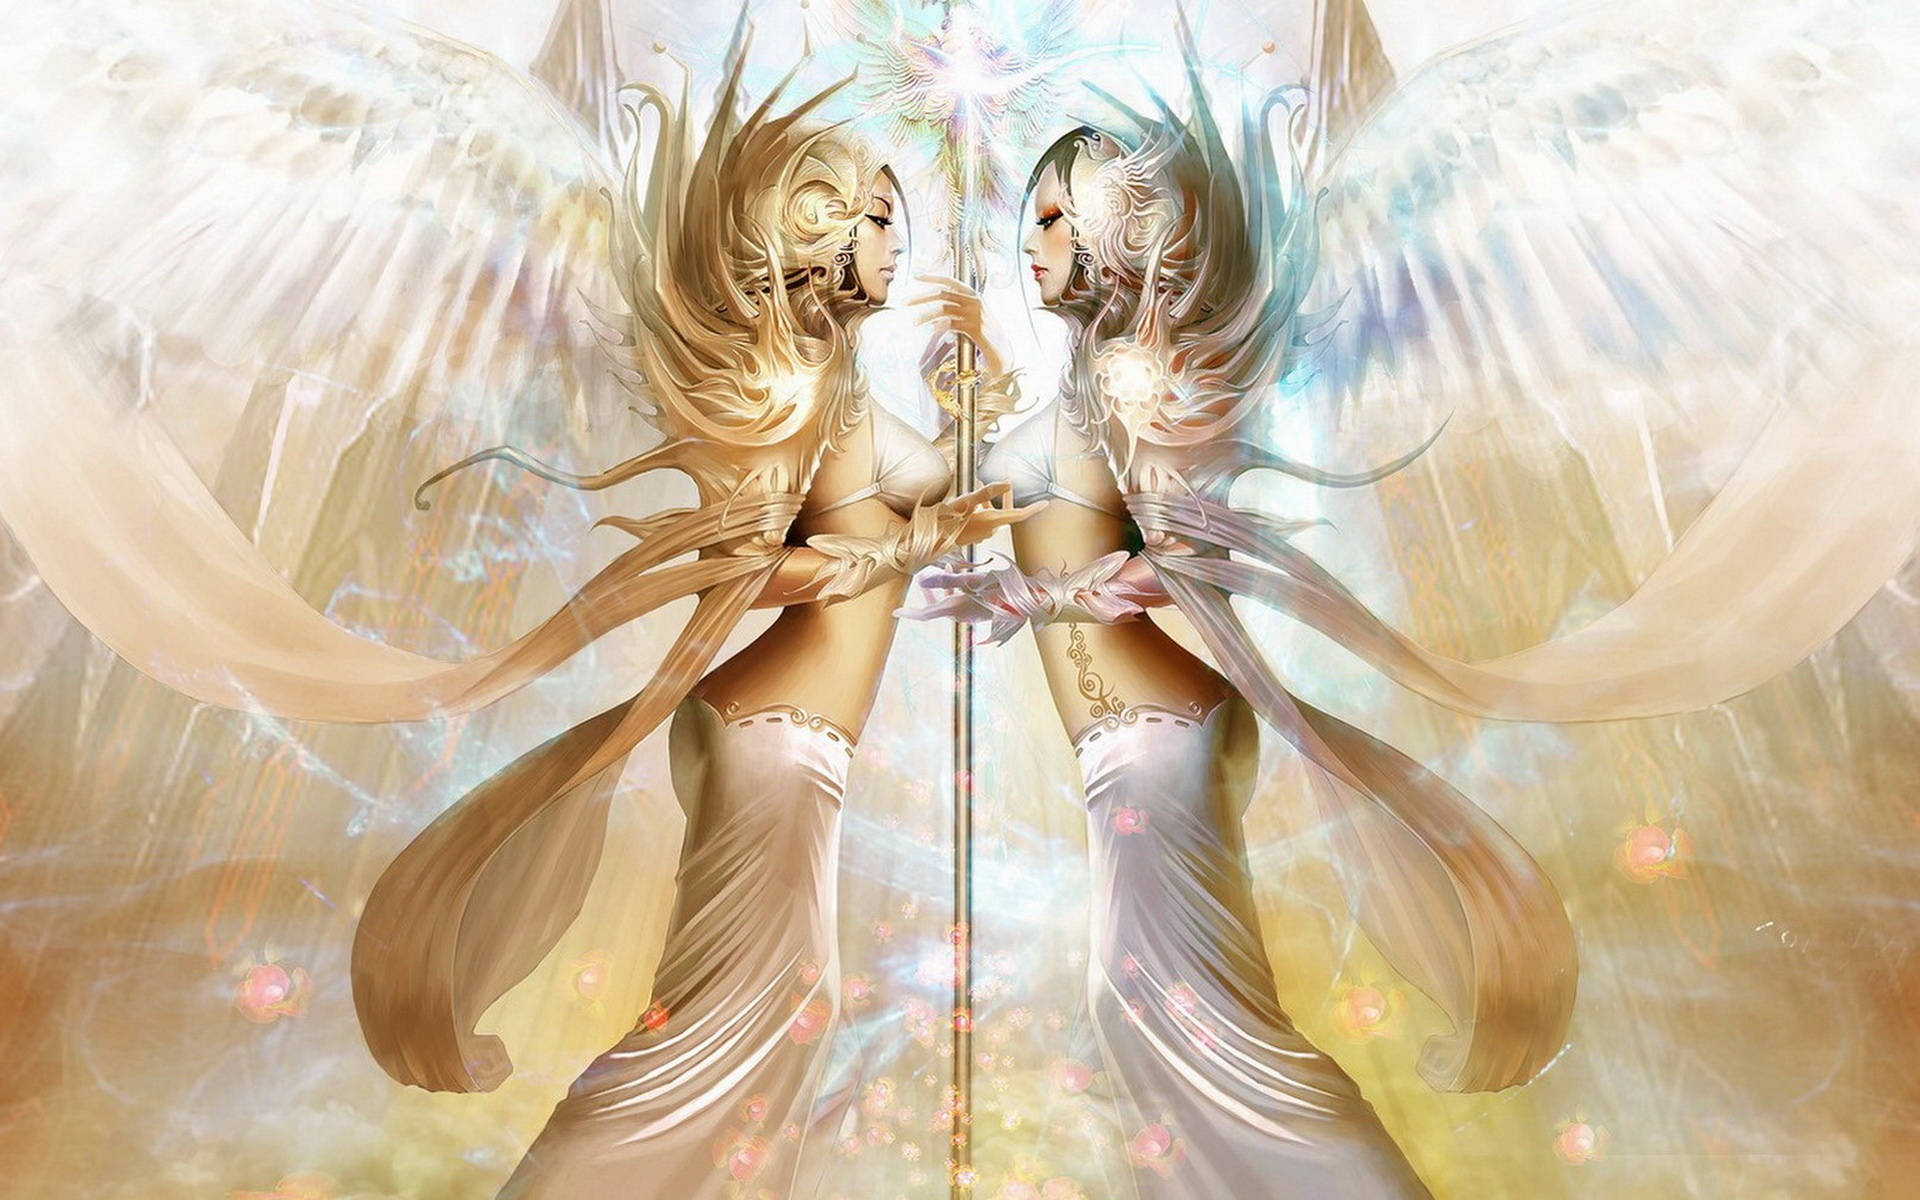 Fantasy art glowing angels face to face wallpaper.